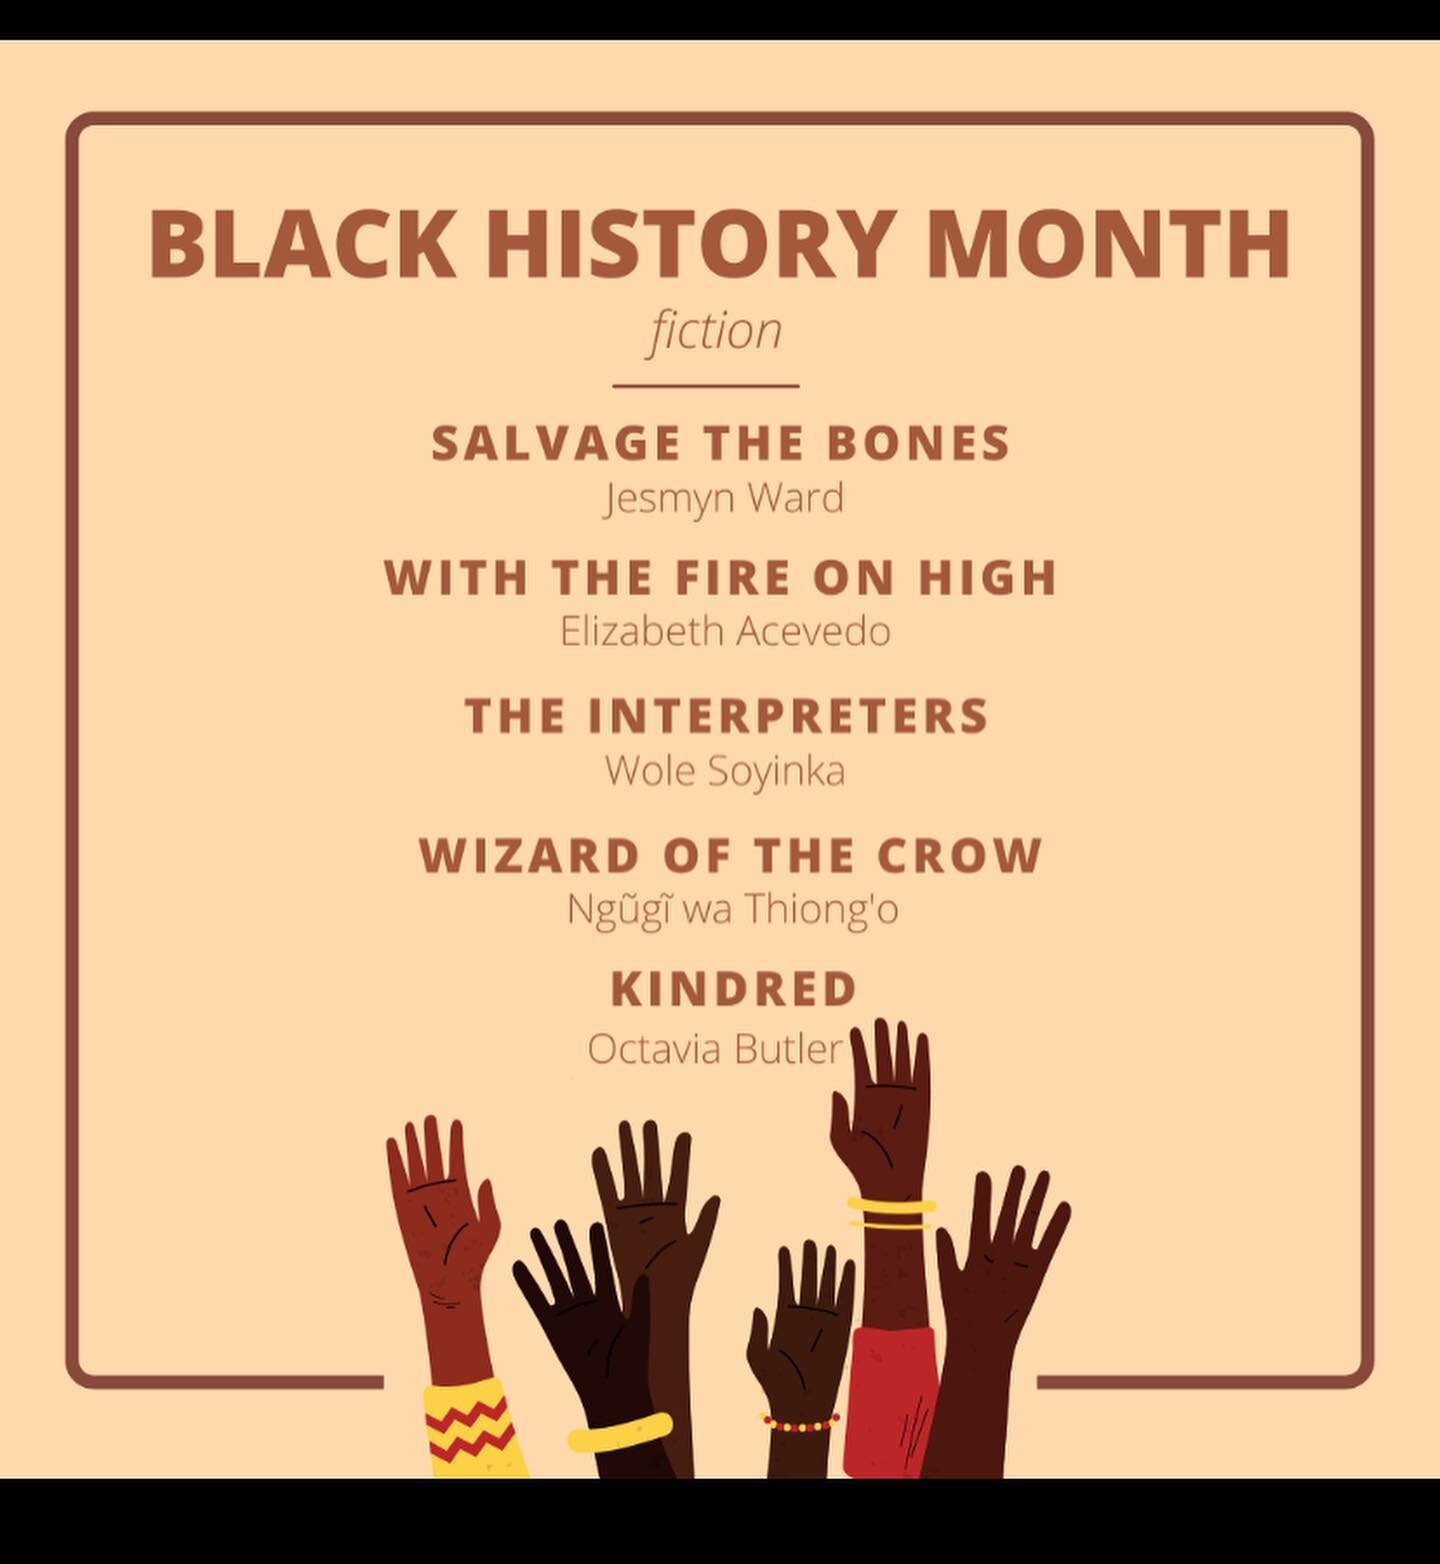 Black voices should always be heard and celebrated, not just during Black History Month. Red Weather compiled a list of our favorite works written by black authors. Please take a moment to check out some of these amazing literary pieces!